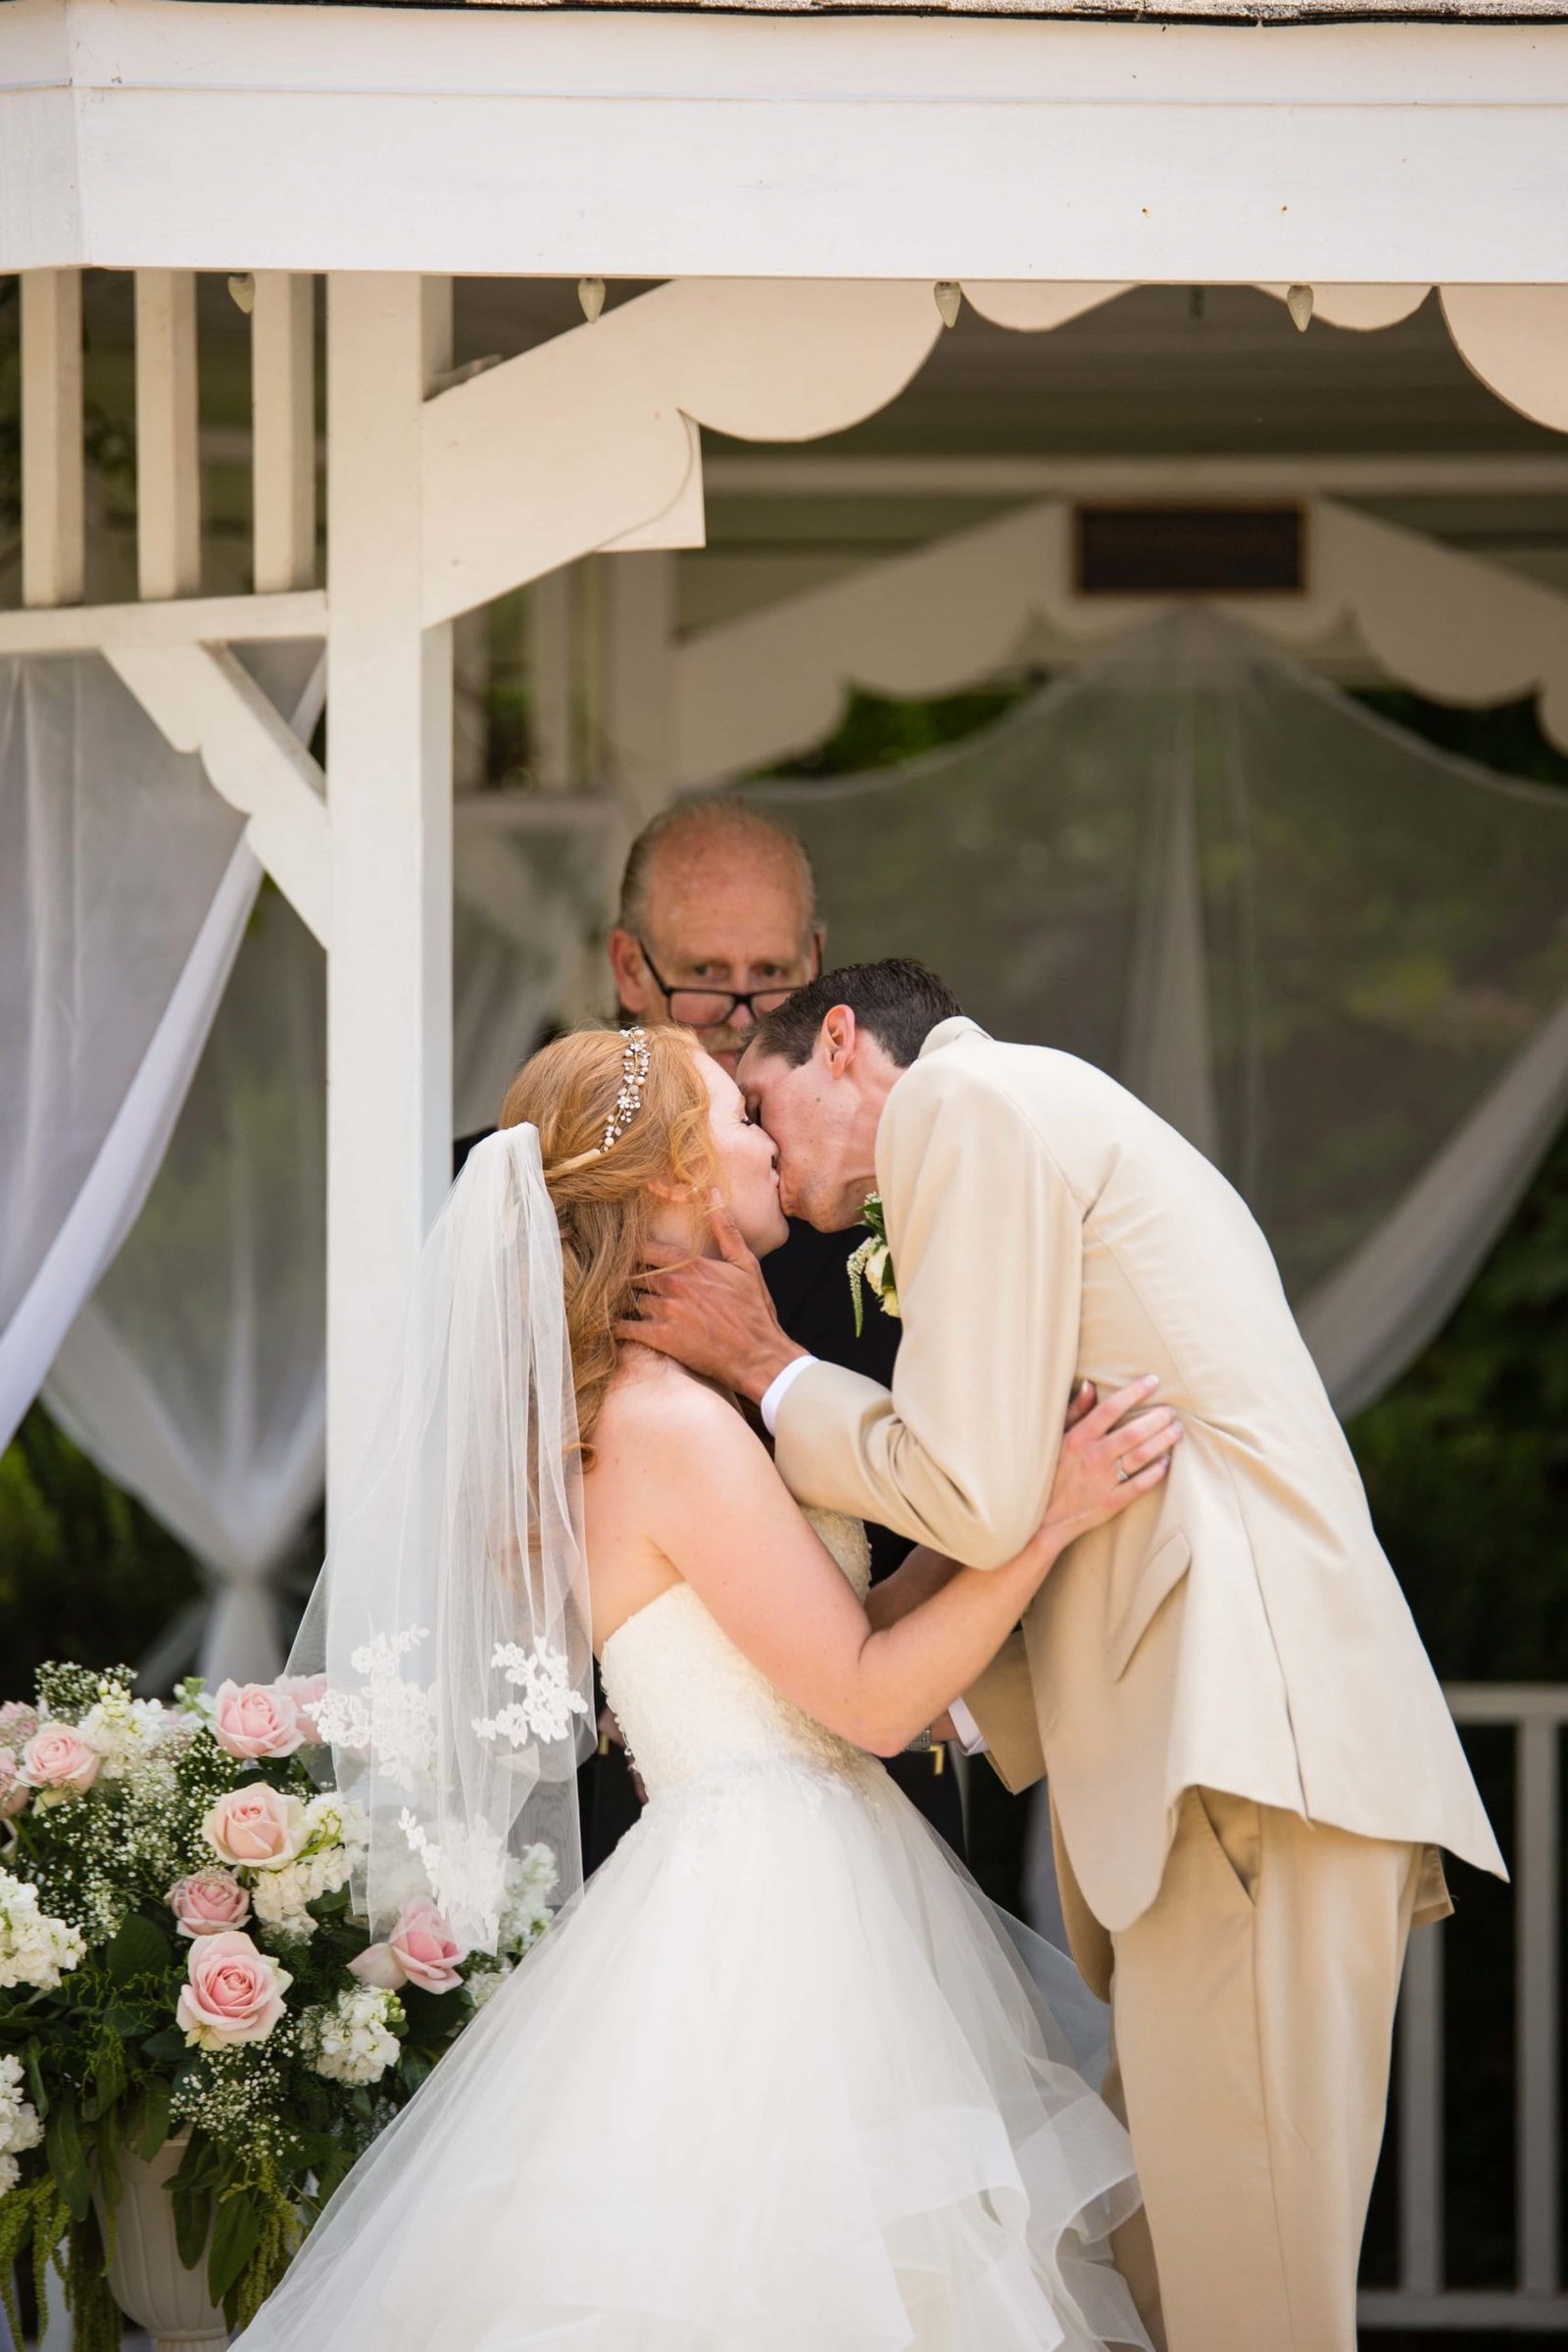 Bride and groom share their first kiss under the gazebo at Heritage House in Arroyo Grande